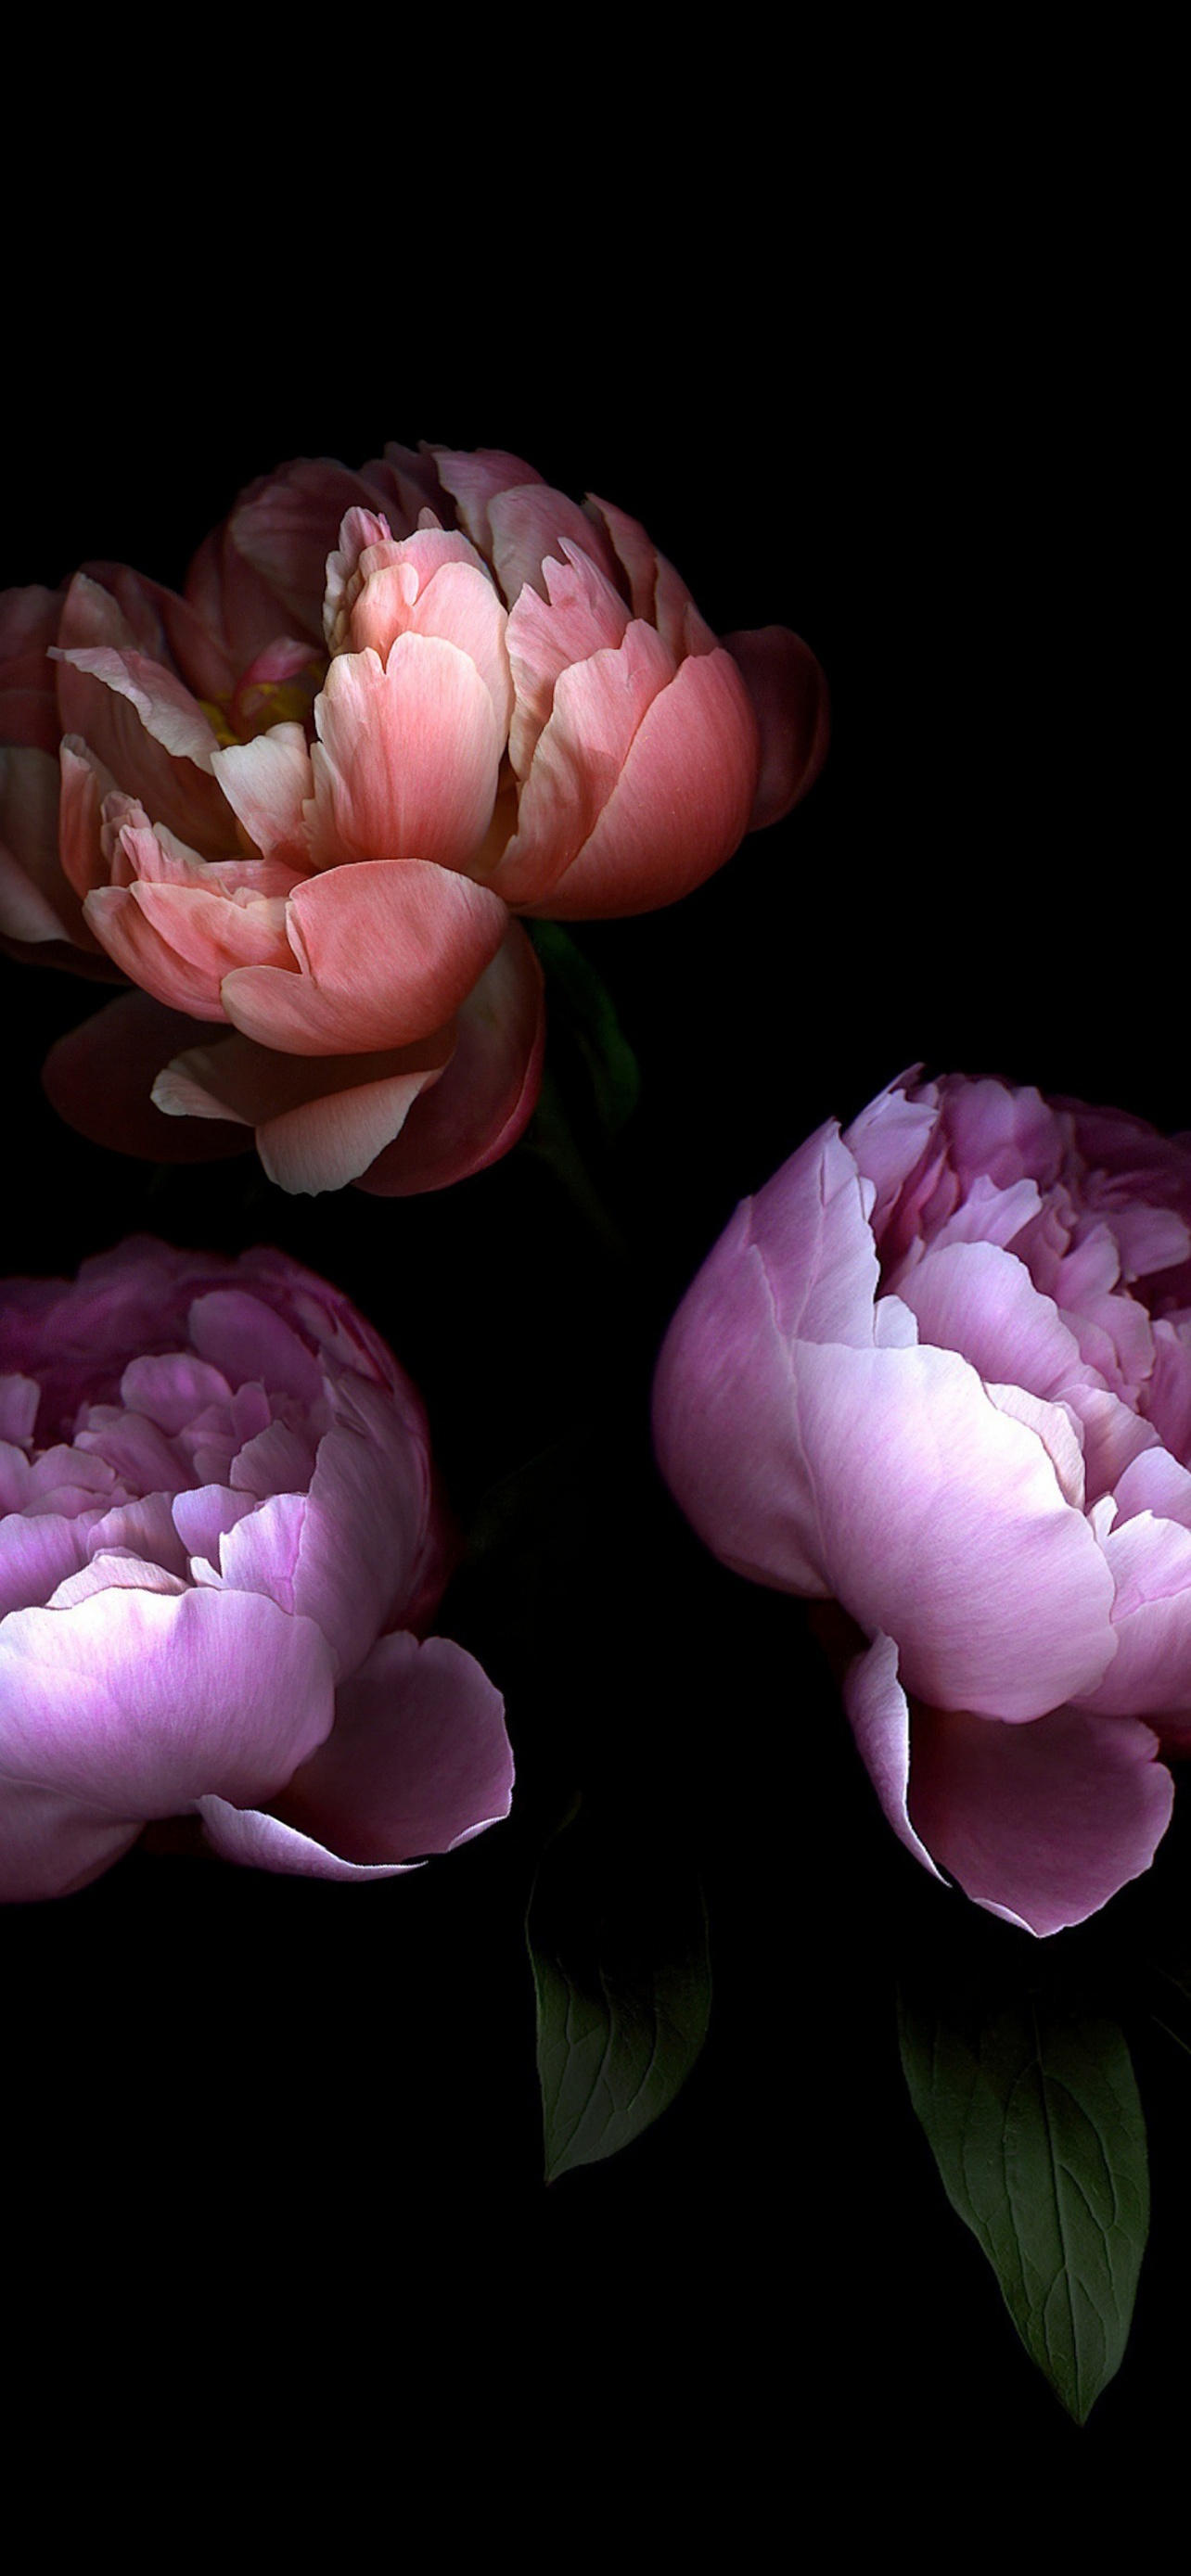 Surreal Peonies Bouquet on Black Background Soft Focus Dark Spring or  Summer Floral Background Stock Image  Image of beautiful wreath 227450795